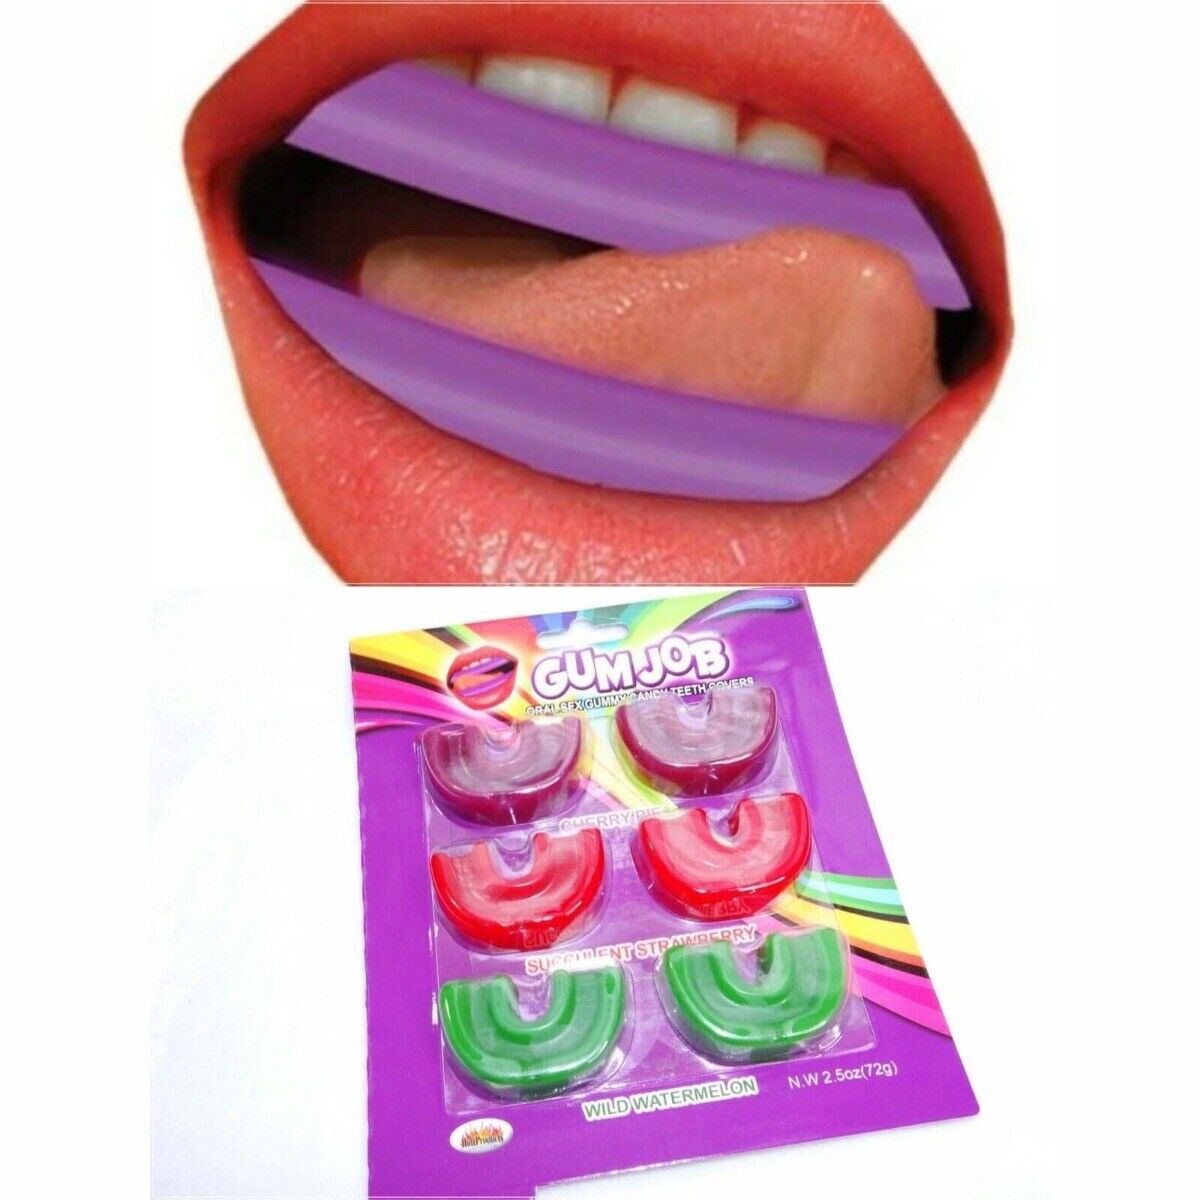 Gum Job Oral Sex Gummy Candy Teeth Covers Blow-job Enhancer for Couples - 6 PACK